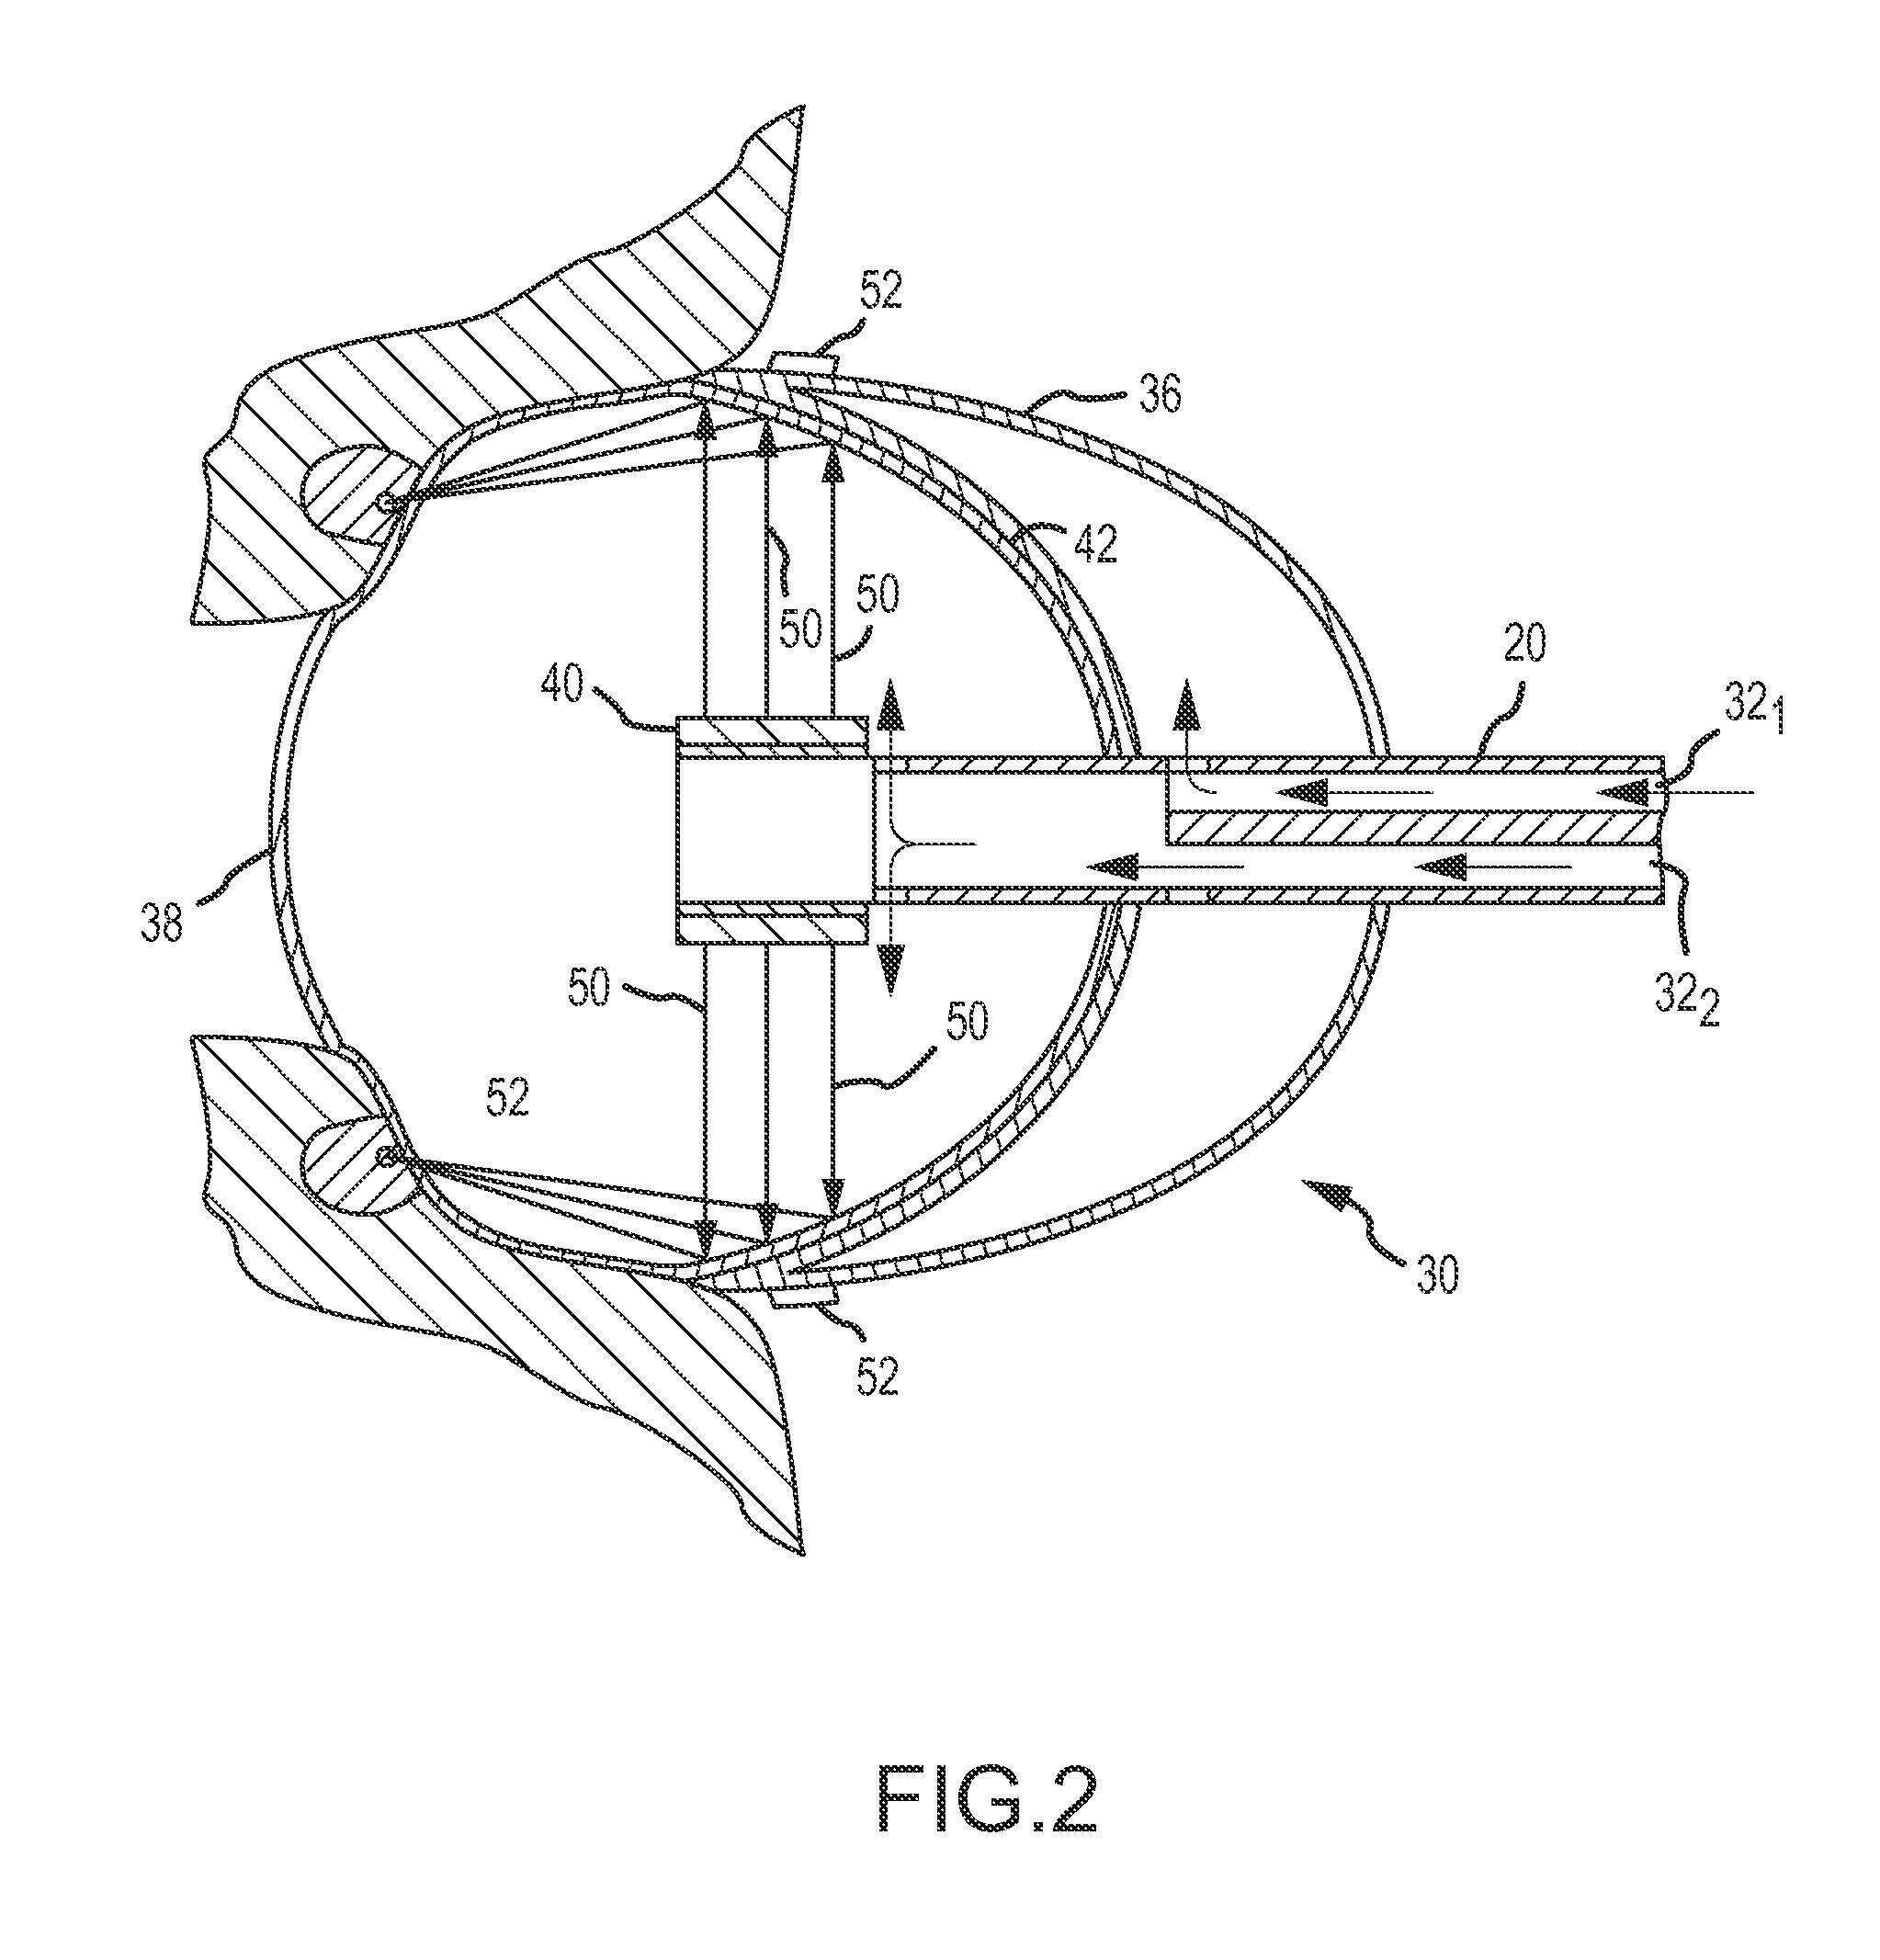 Ablation system with blood leakage minimization and tissue protective capabilities